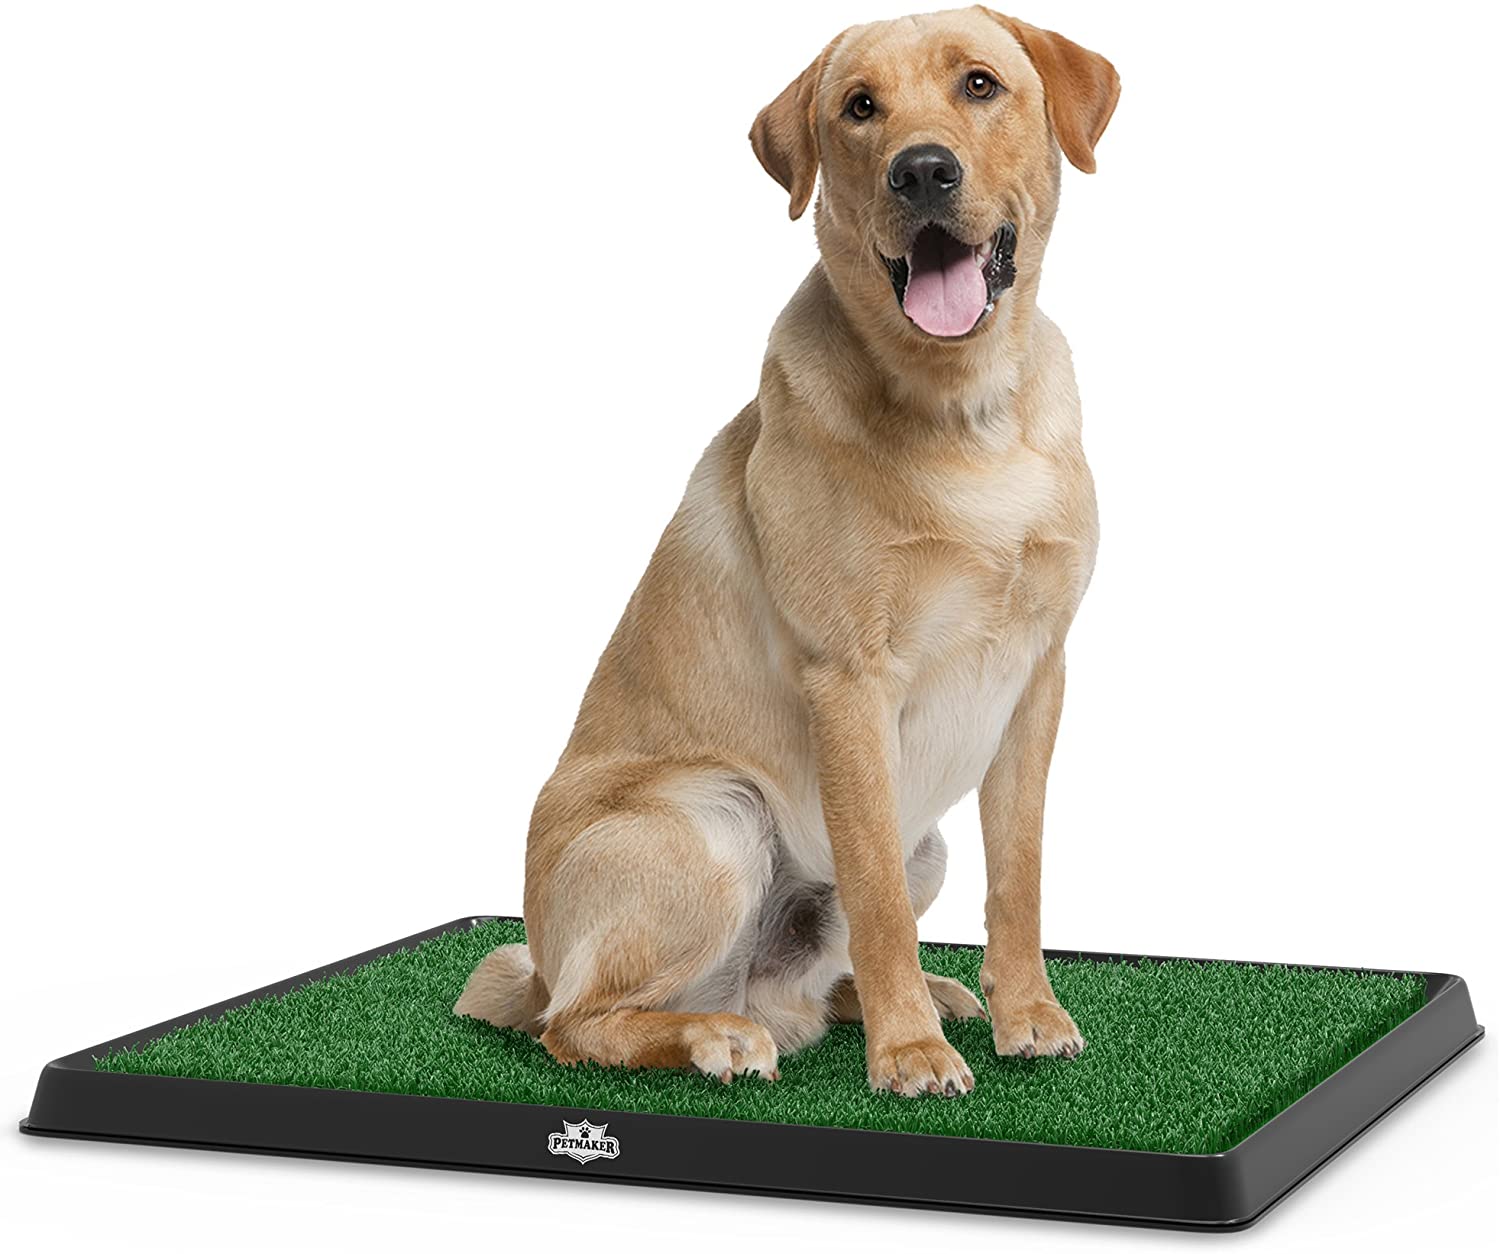 Photo 1 of Artificial Grass Puppy Pad Collection  for Dogs and Small Pets  Portable Training Pad with Tray  Dog Housebreaking Supplies by PETMAKER